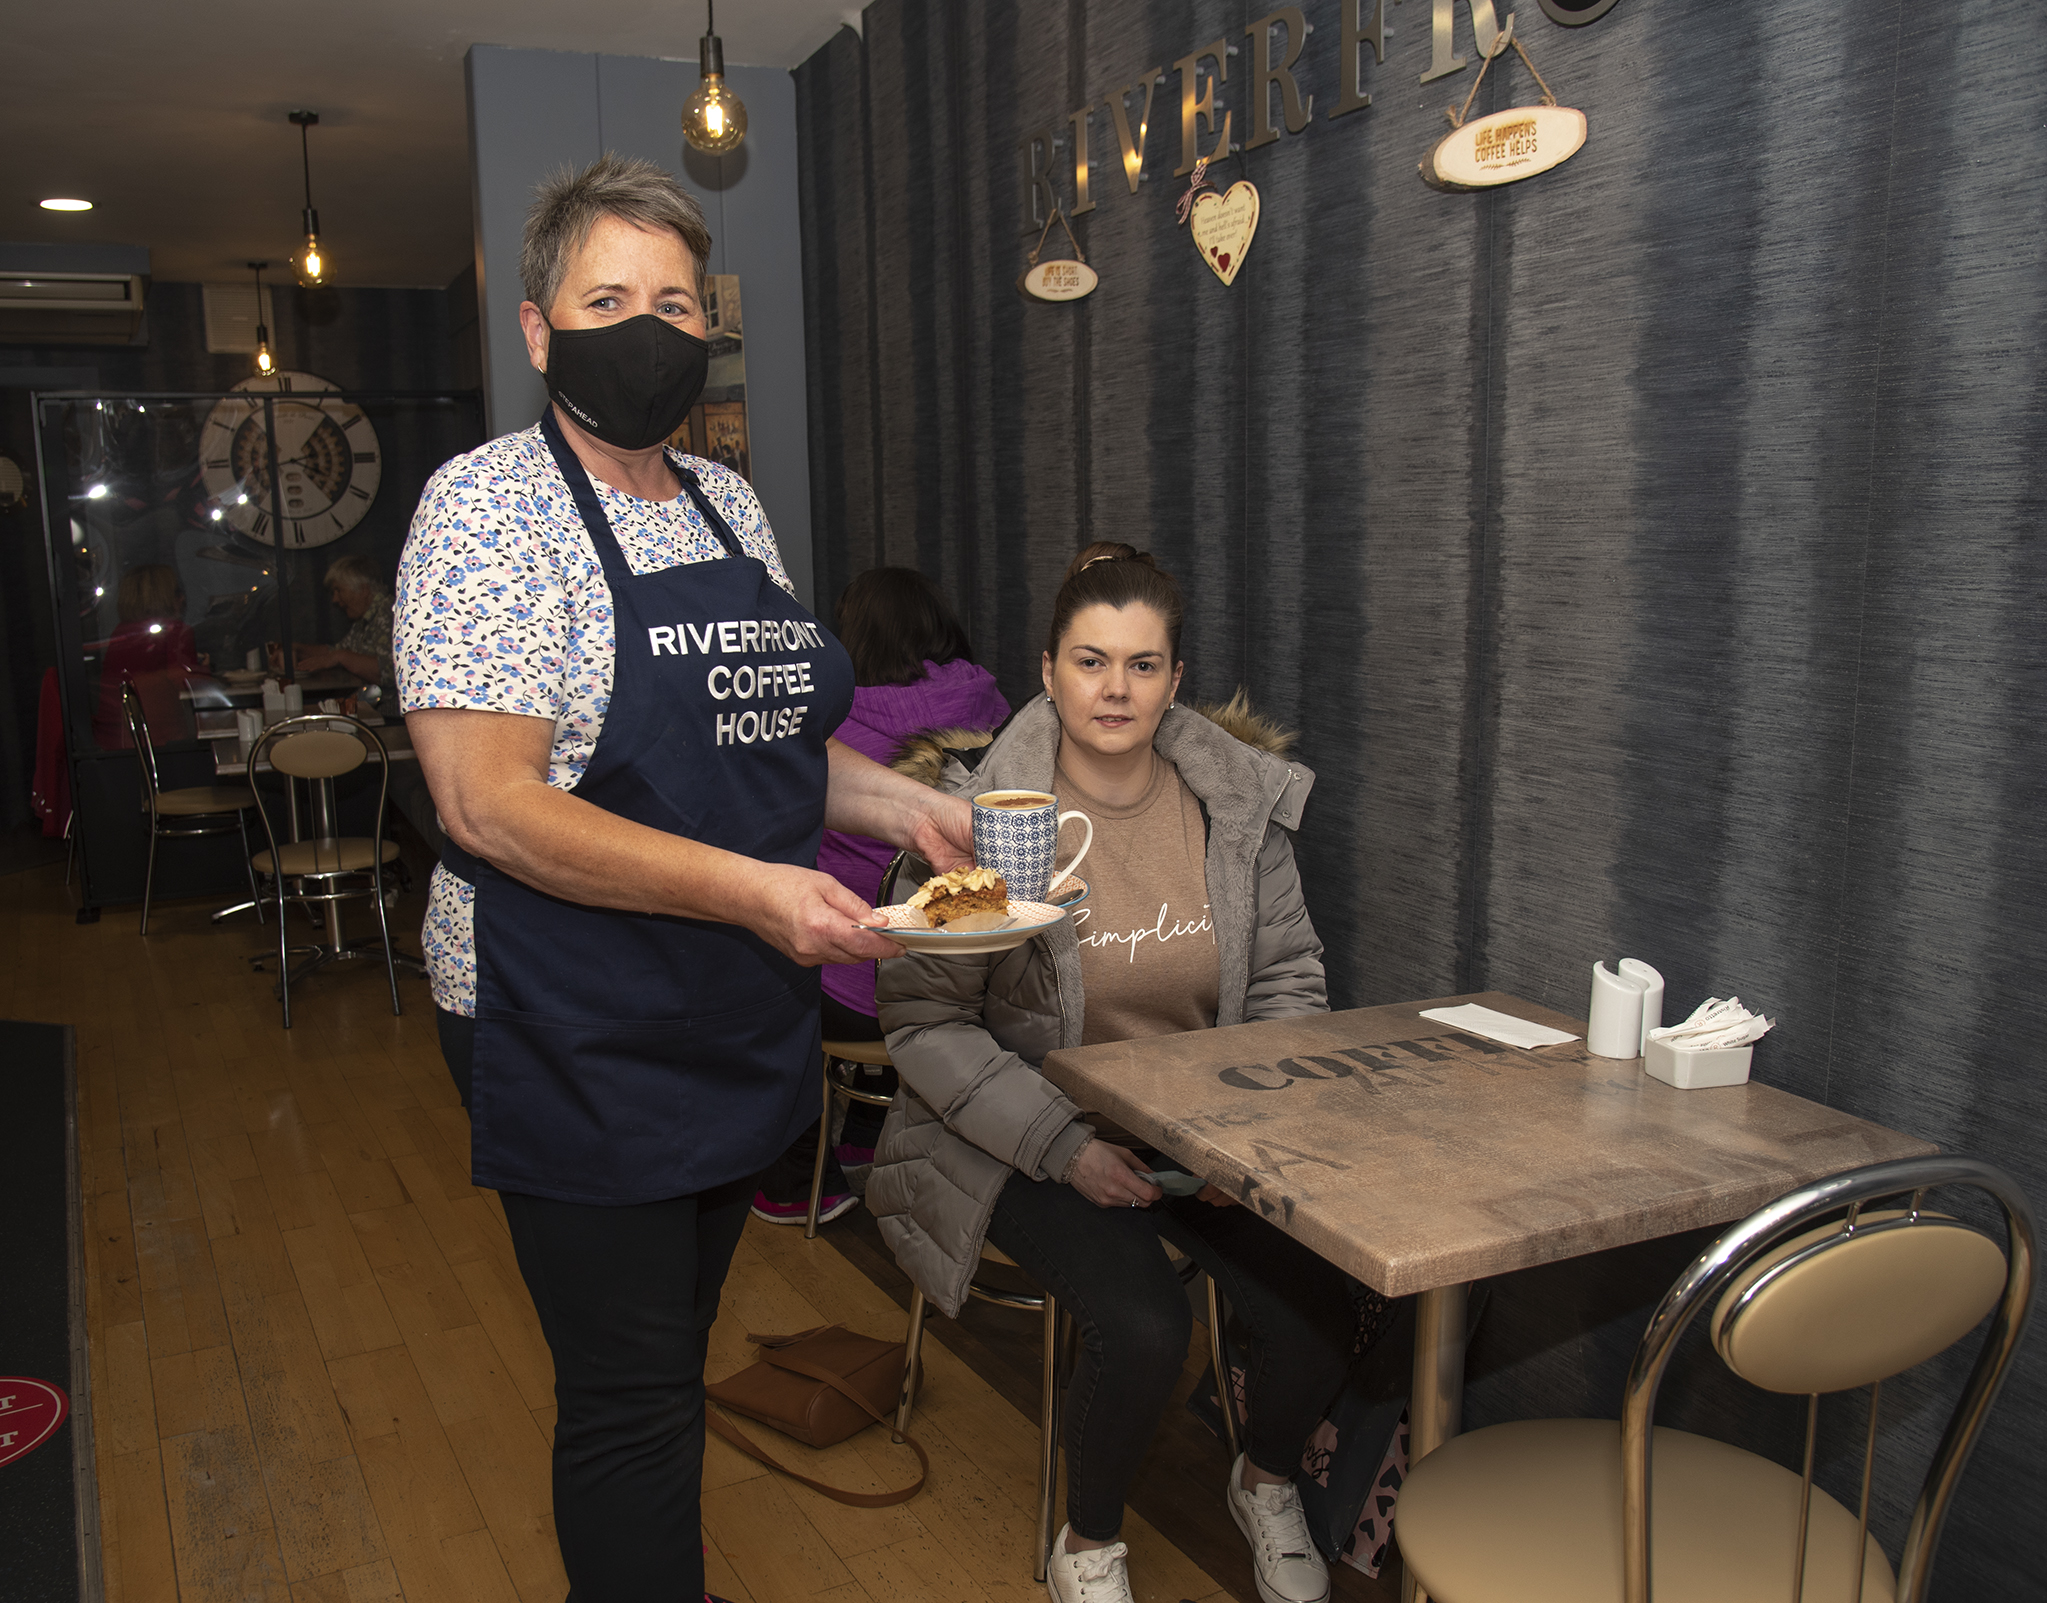 Indoor hospitality reopens to cafe owners' delight